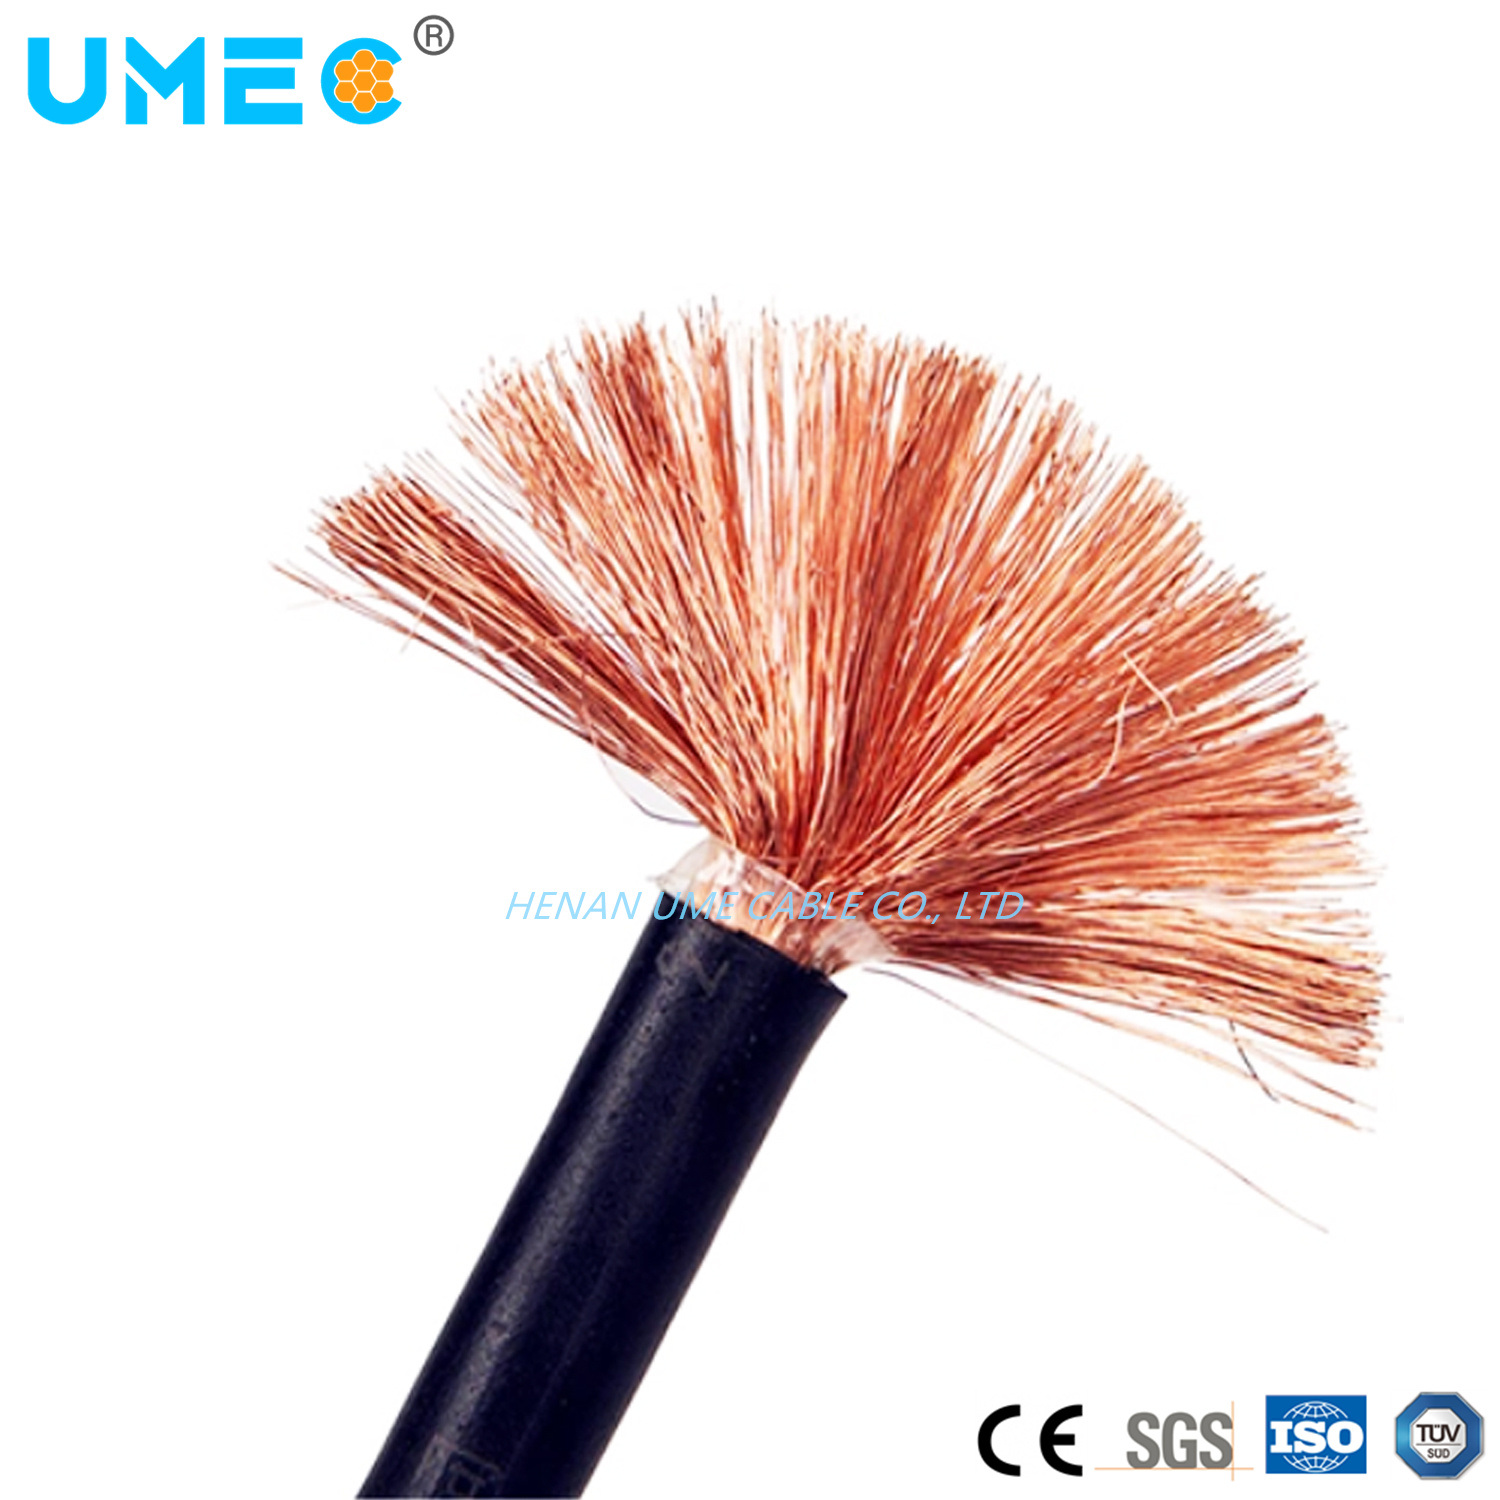 Natural Rubber Sheathed Welding Cable